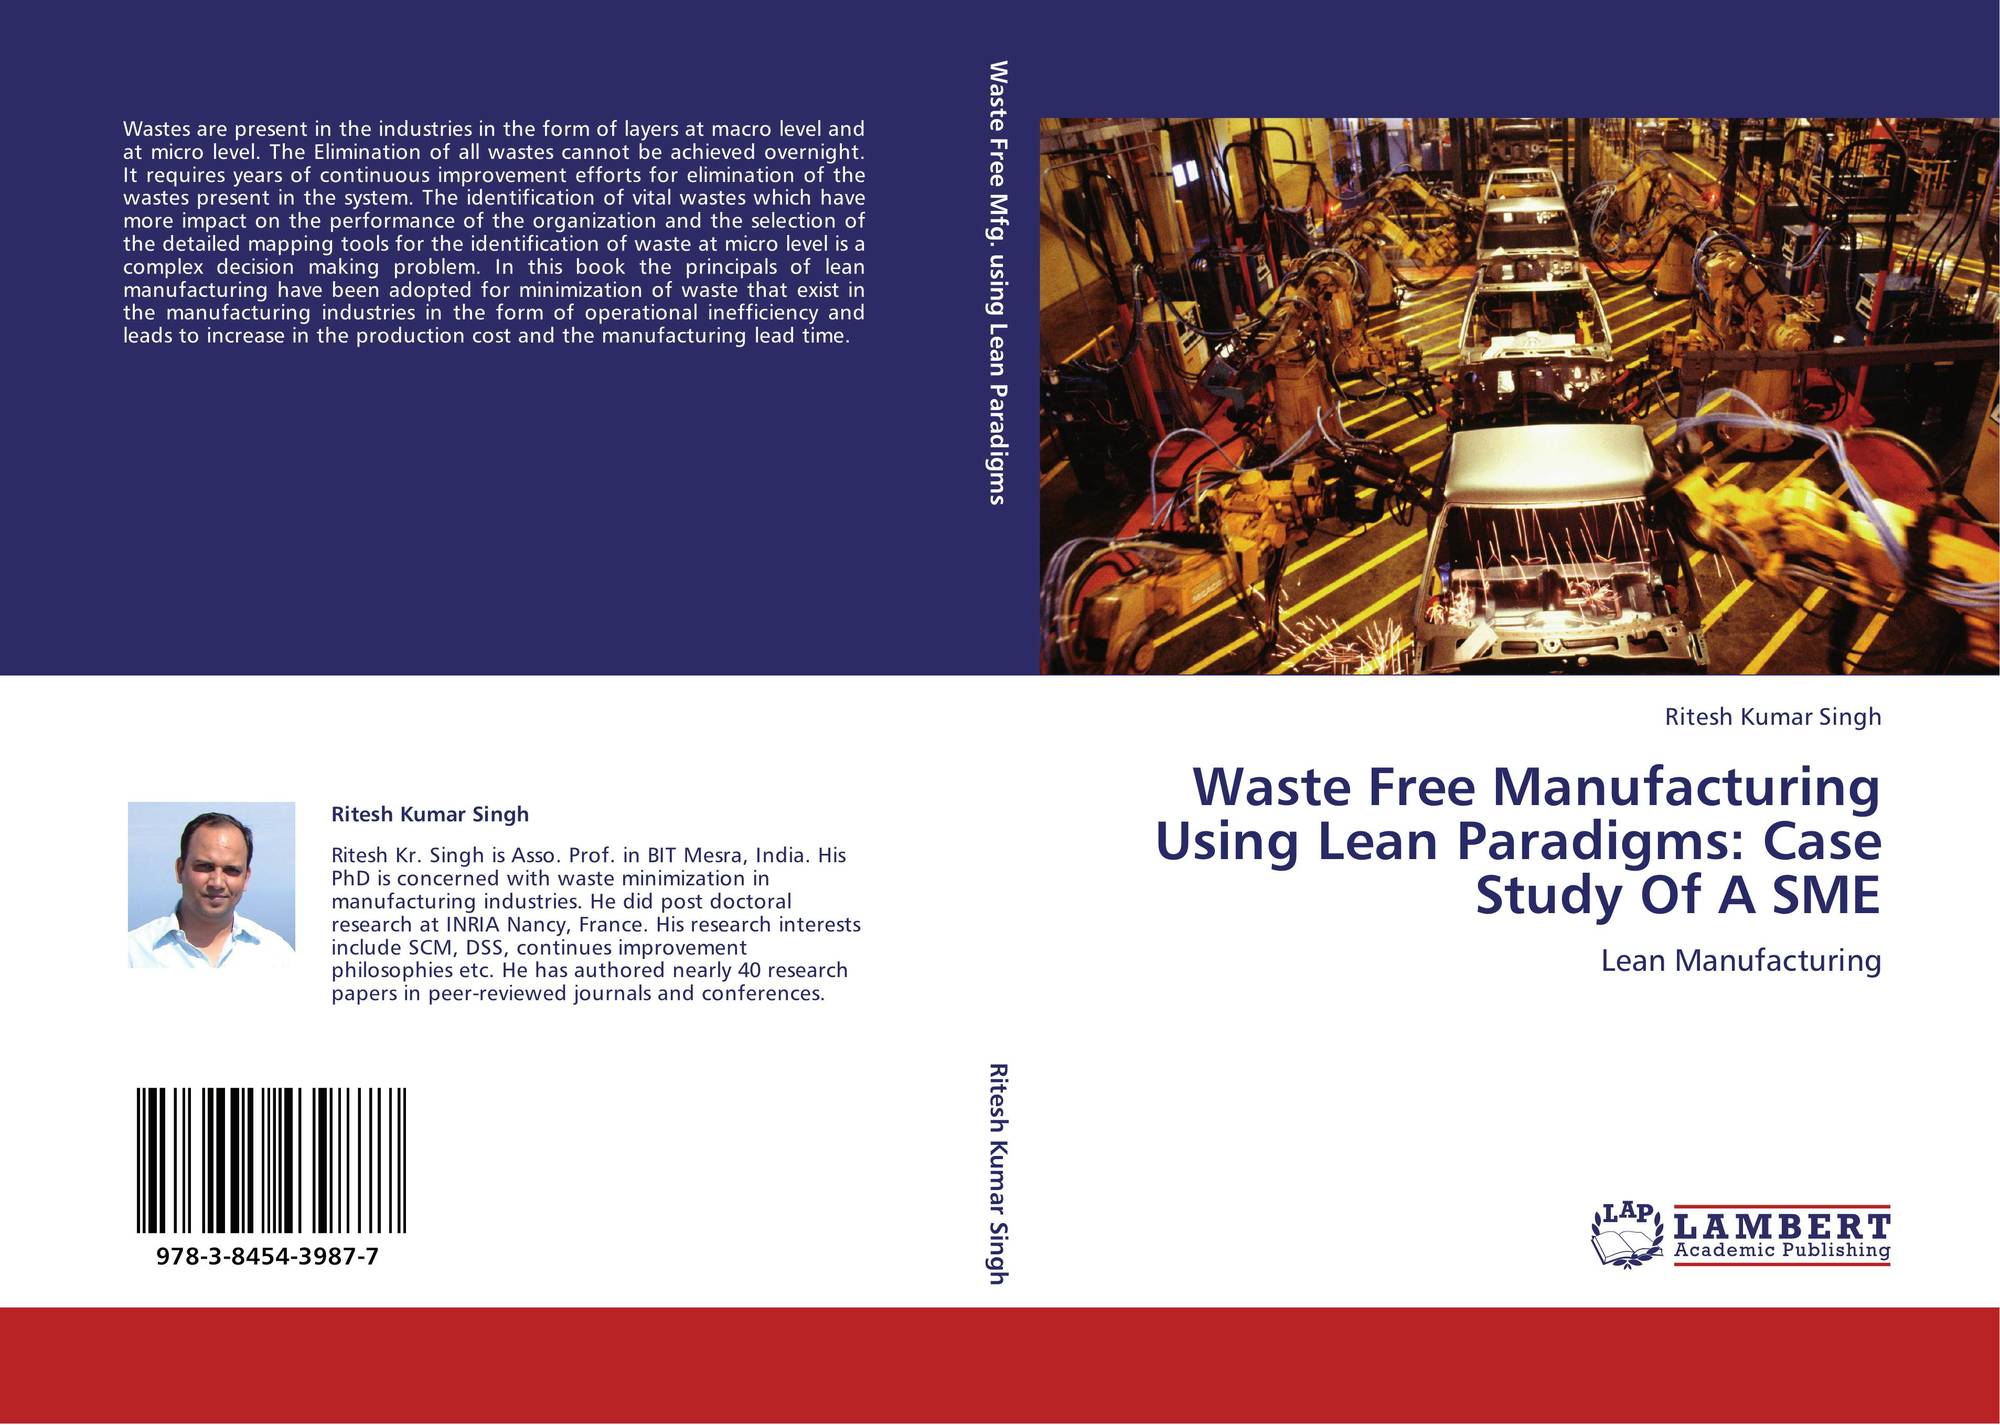 Lean manufacturing research paper searches